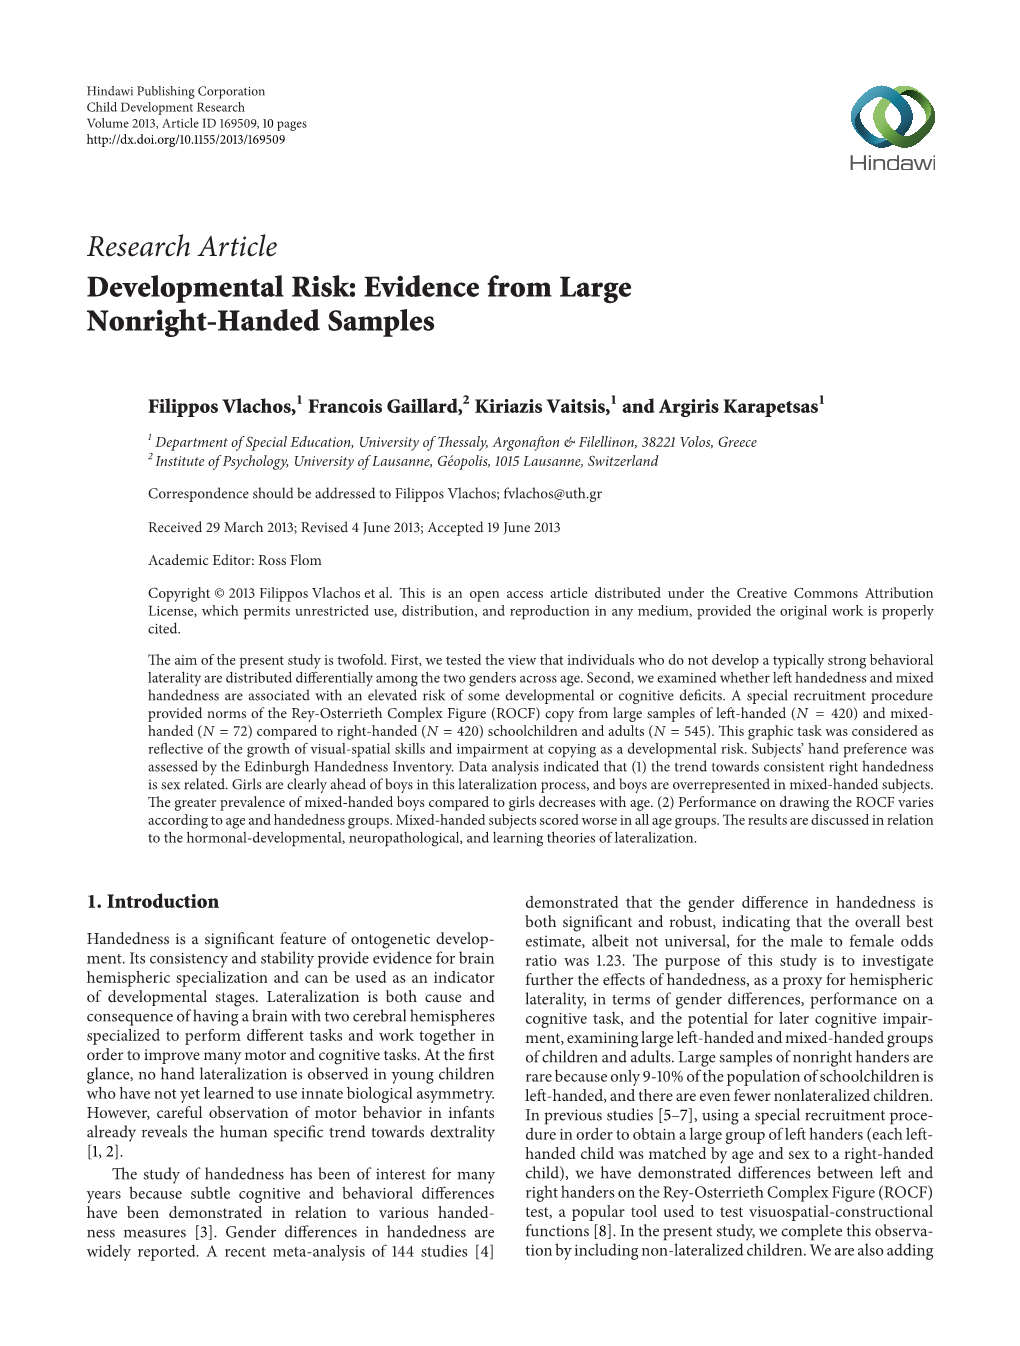 Evidence from Large Nonright-Handed Samples